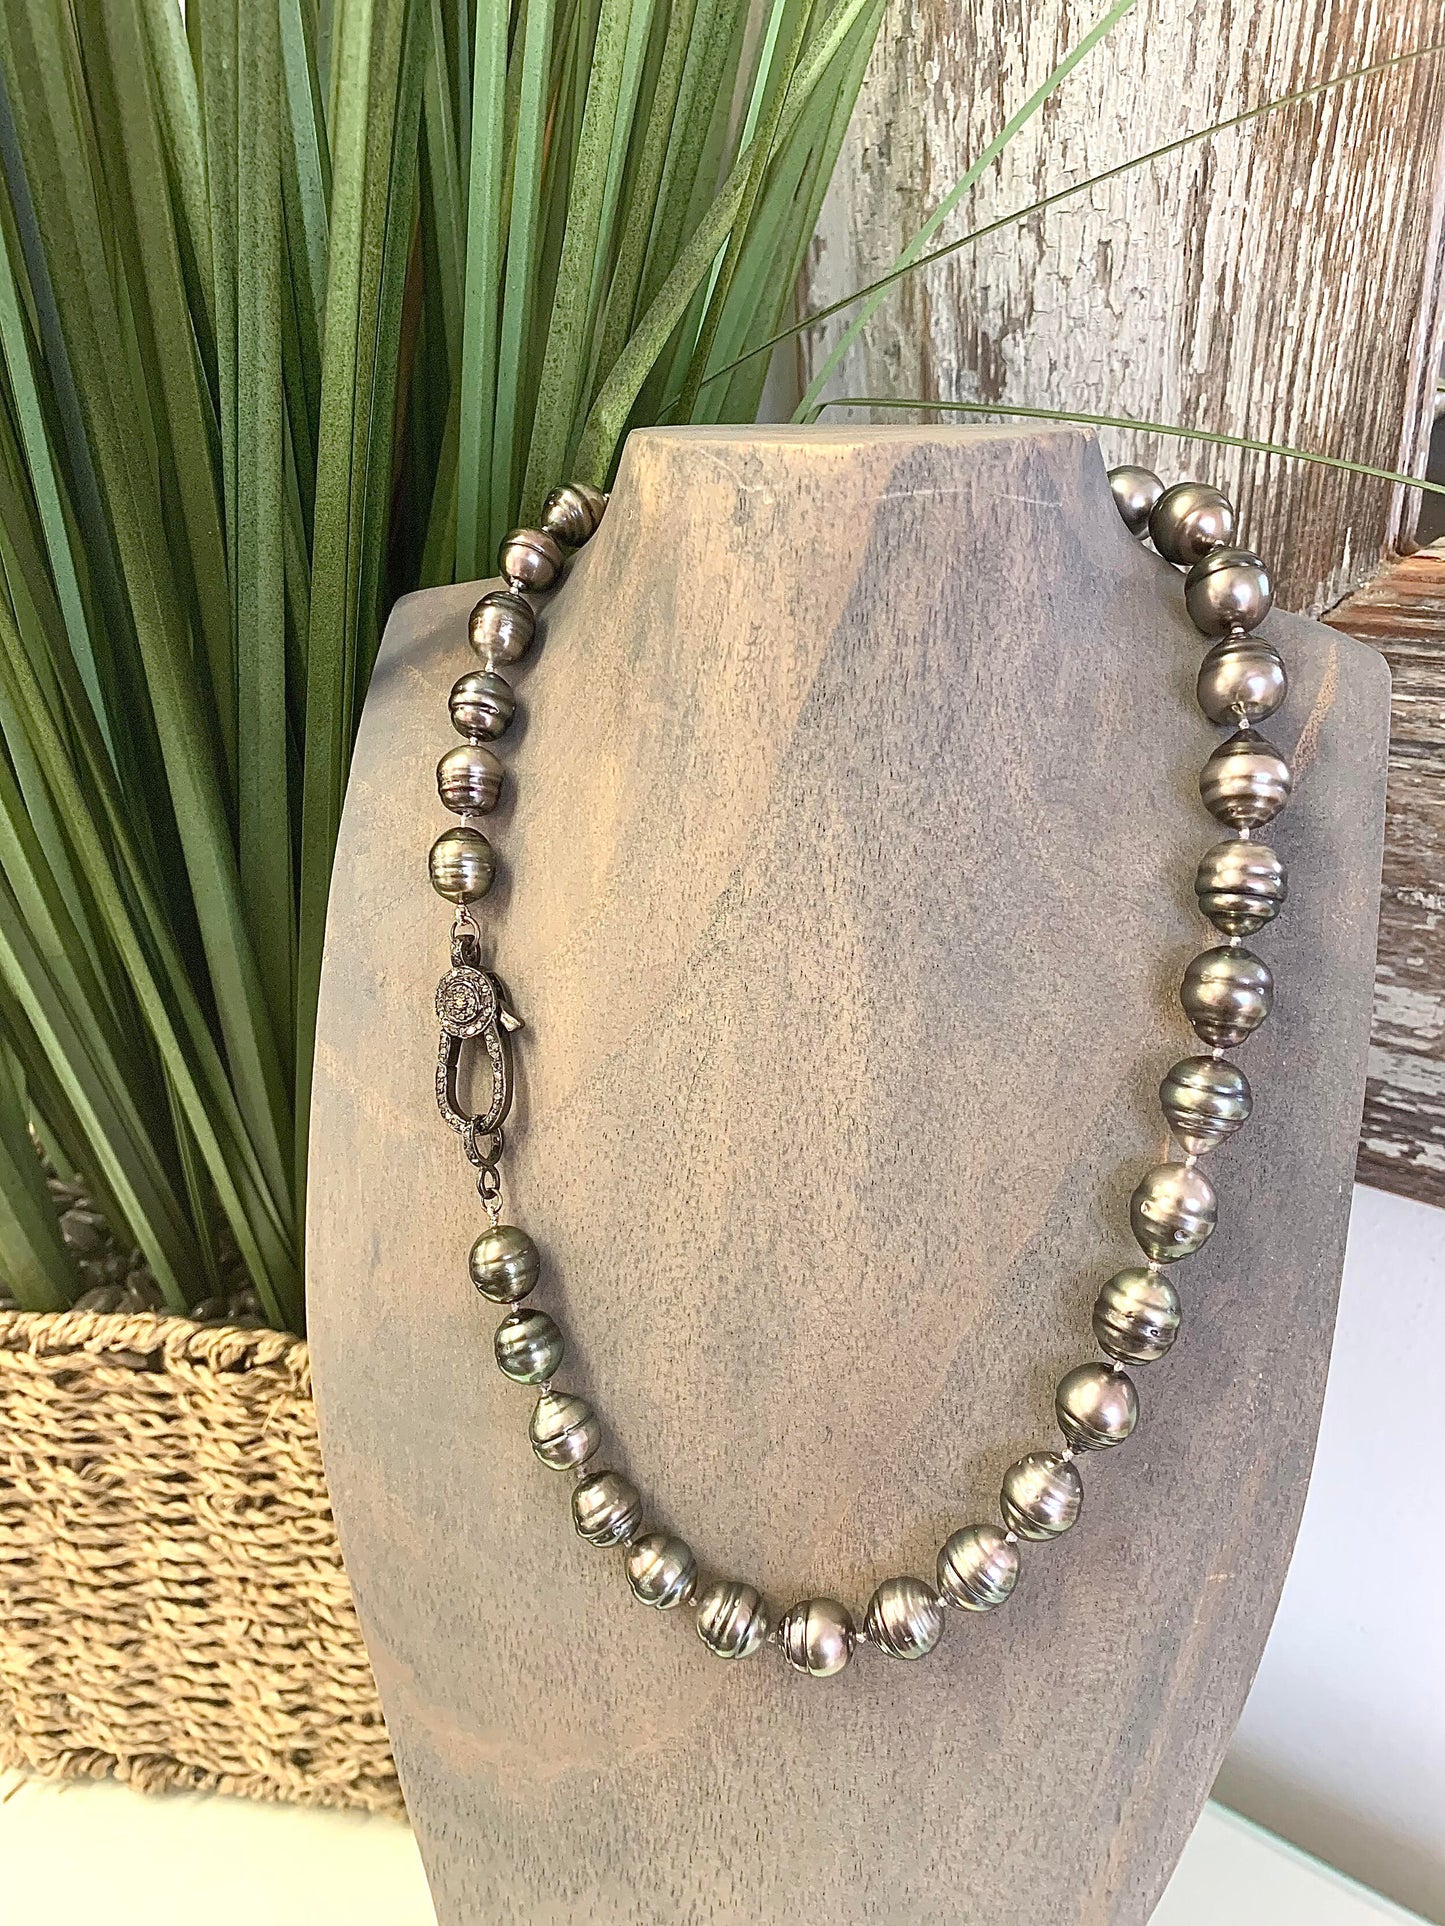 Beautiful Black Tahitian Pearl Necklace featuring a Sterling Silver and Grey Diamond clasp handmade by Jewel in the Sea Nantucket